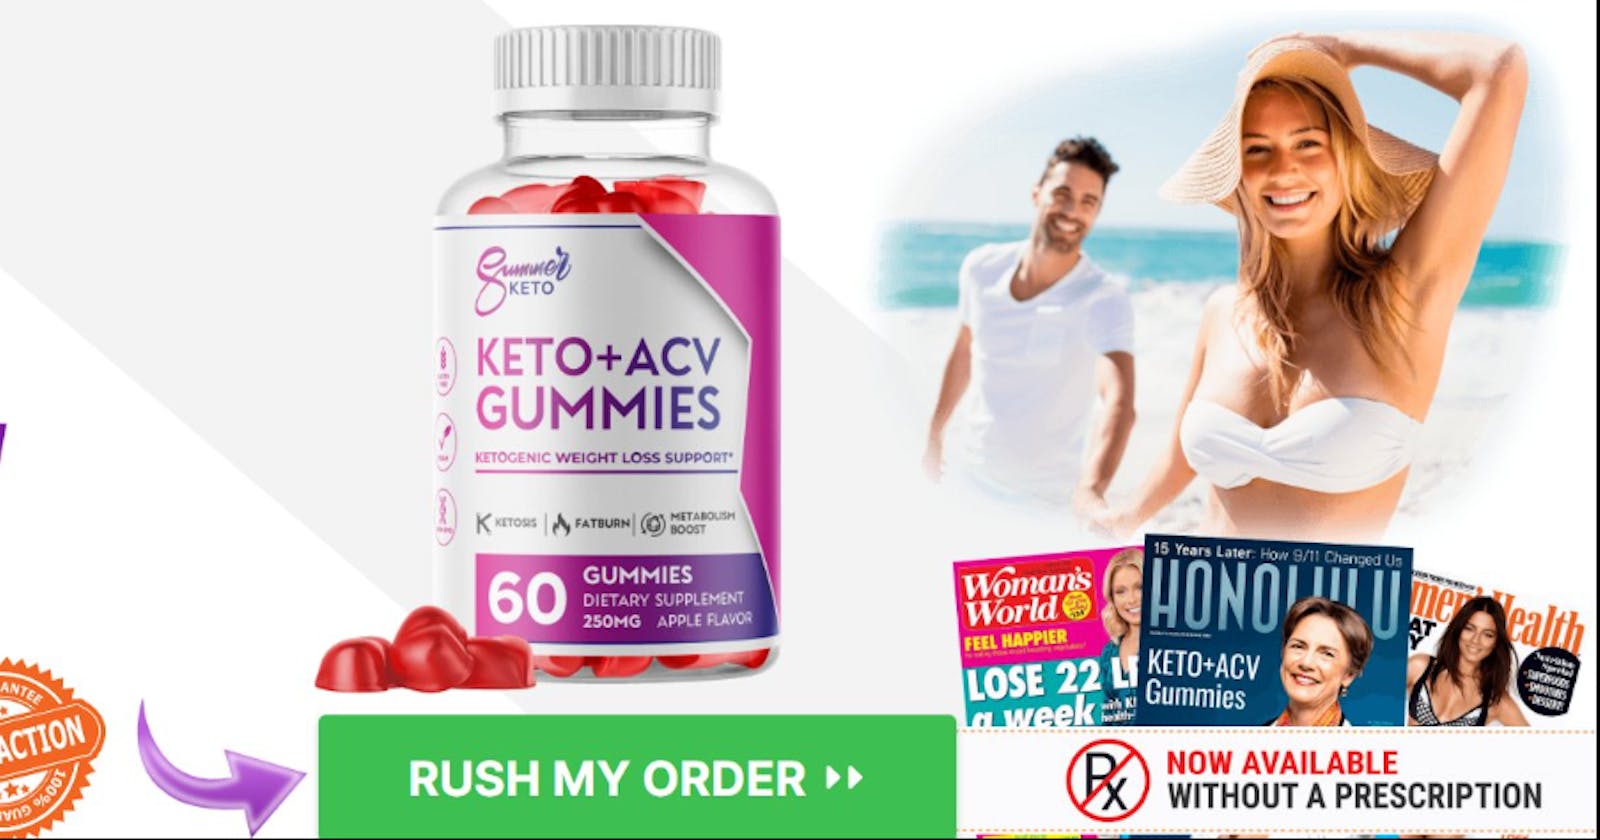 Summer Keto + ACV Gummies Reviews, Side Effects, Cost, Walmart, Ingredients & Do They Work?